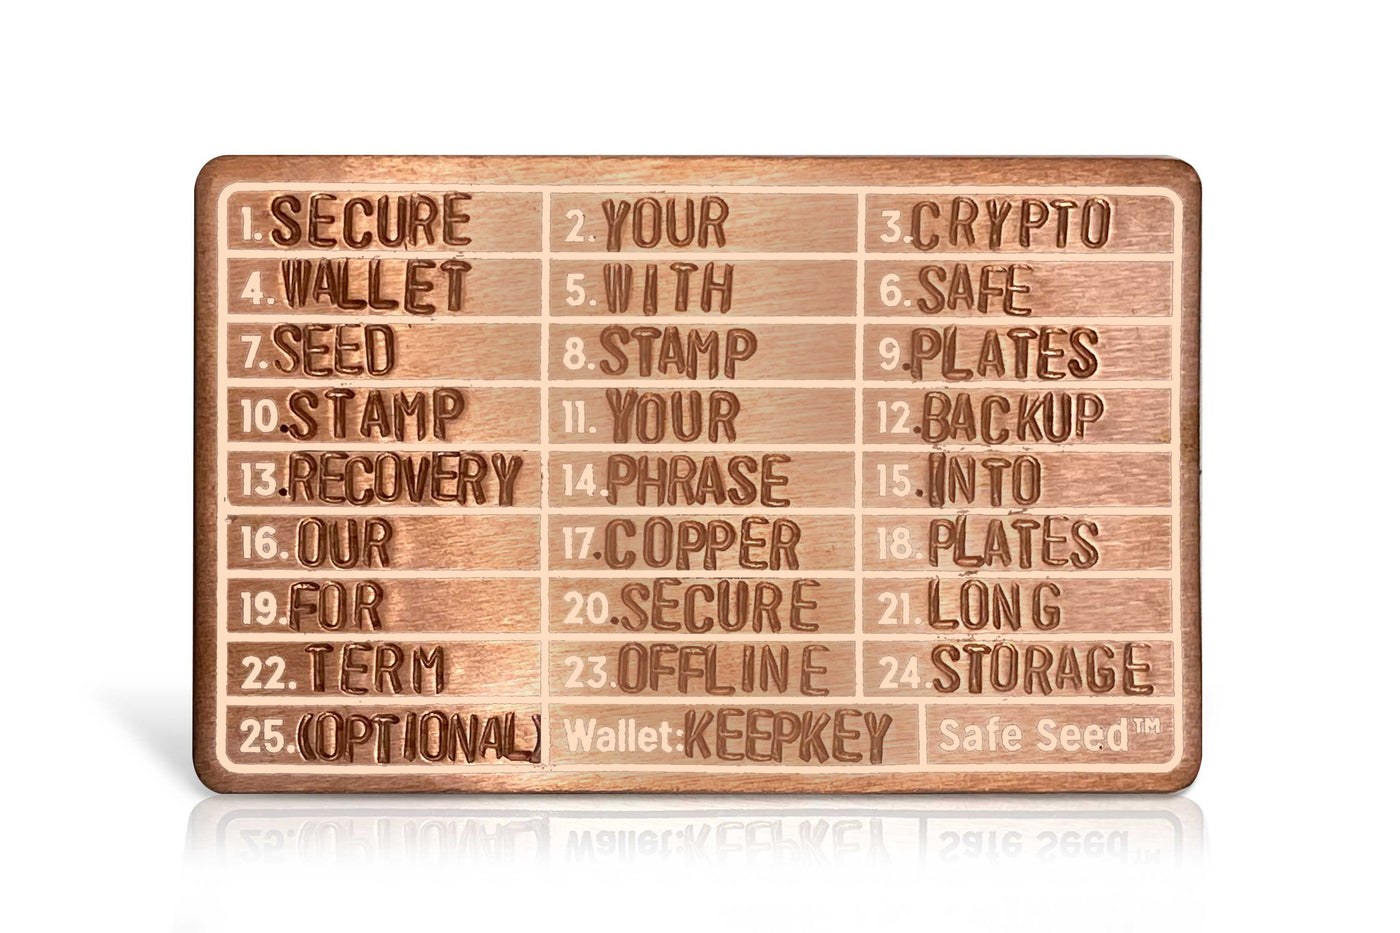 Metal Wallet 12-25 Word Recovery Passphrase Backup Complete Stamp Kit W/ Soft Case (Stamp Kit W/ 2 Copper Plates)